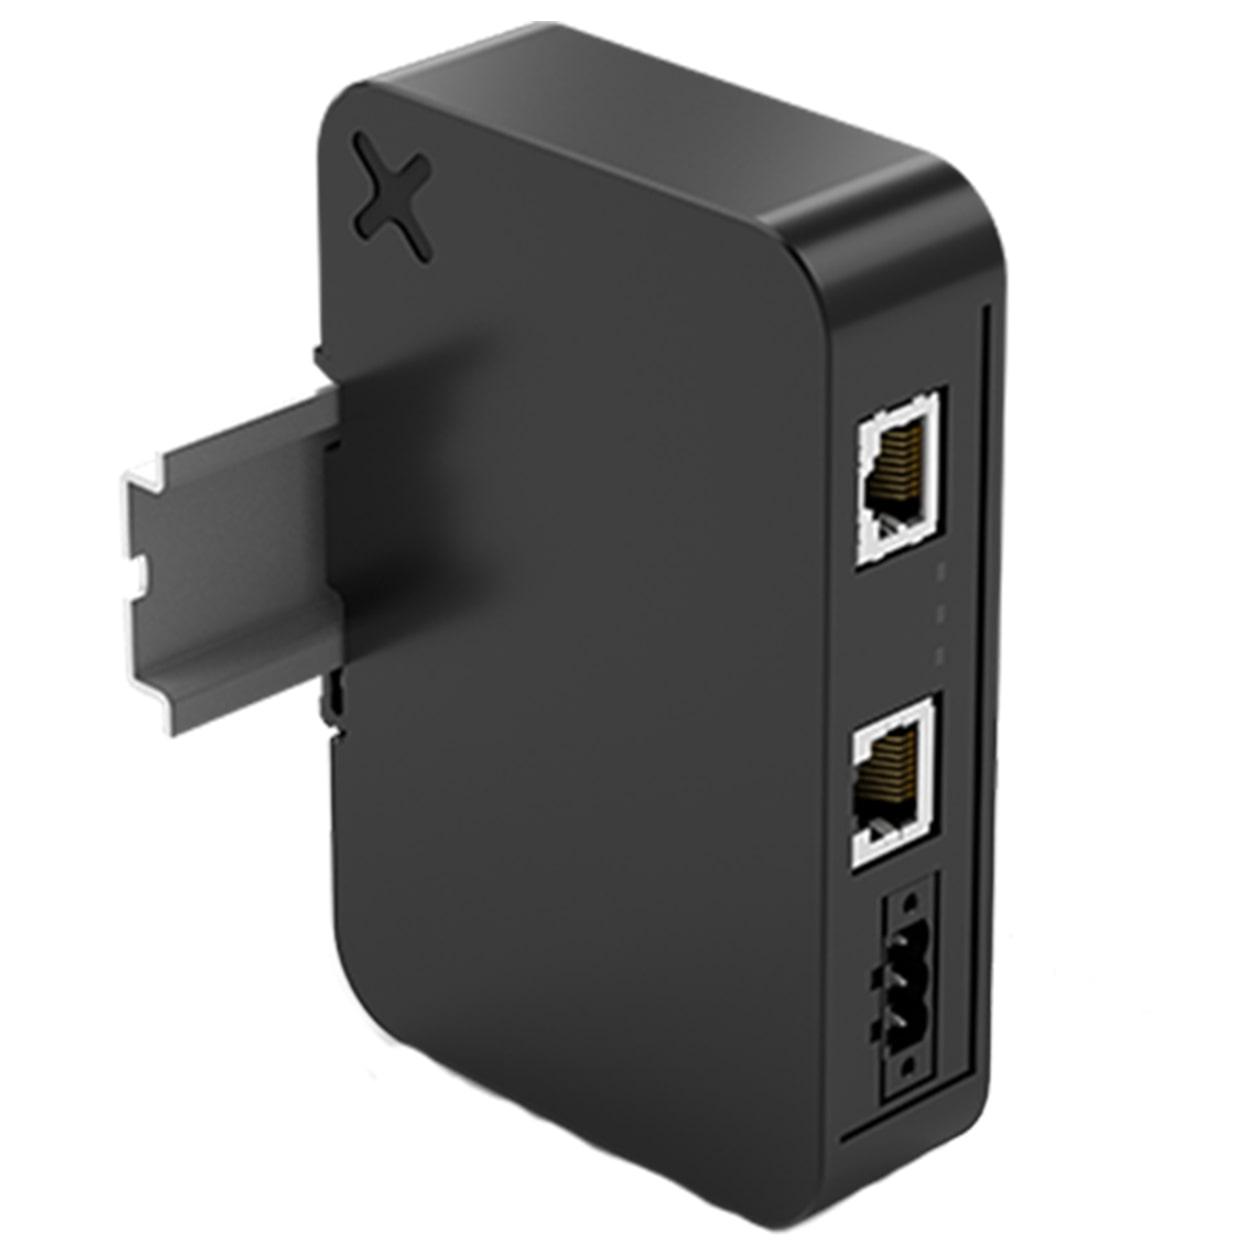 EXOR POE INJECTOR – DIN RAIL MOUNTING